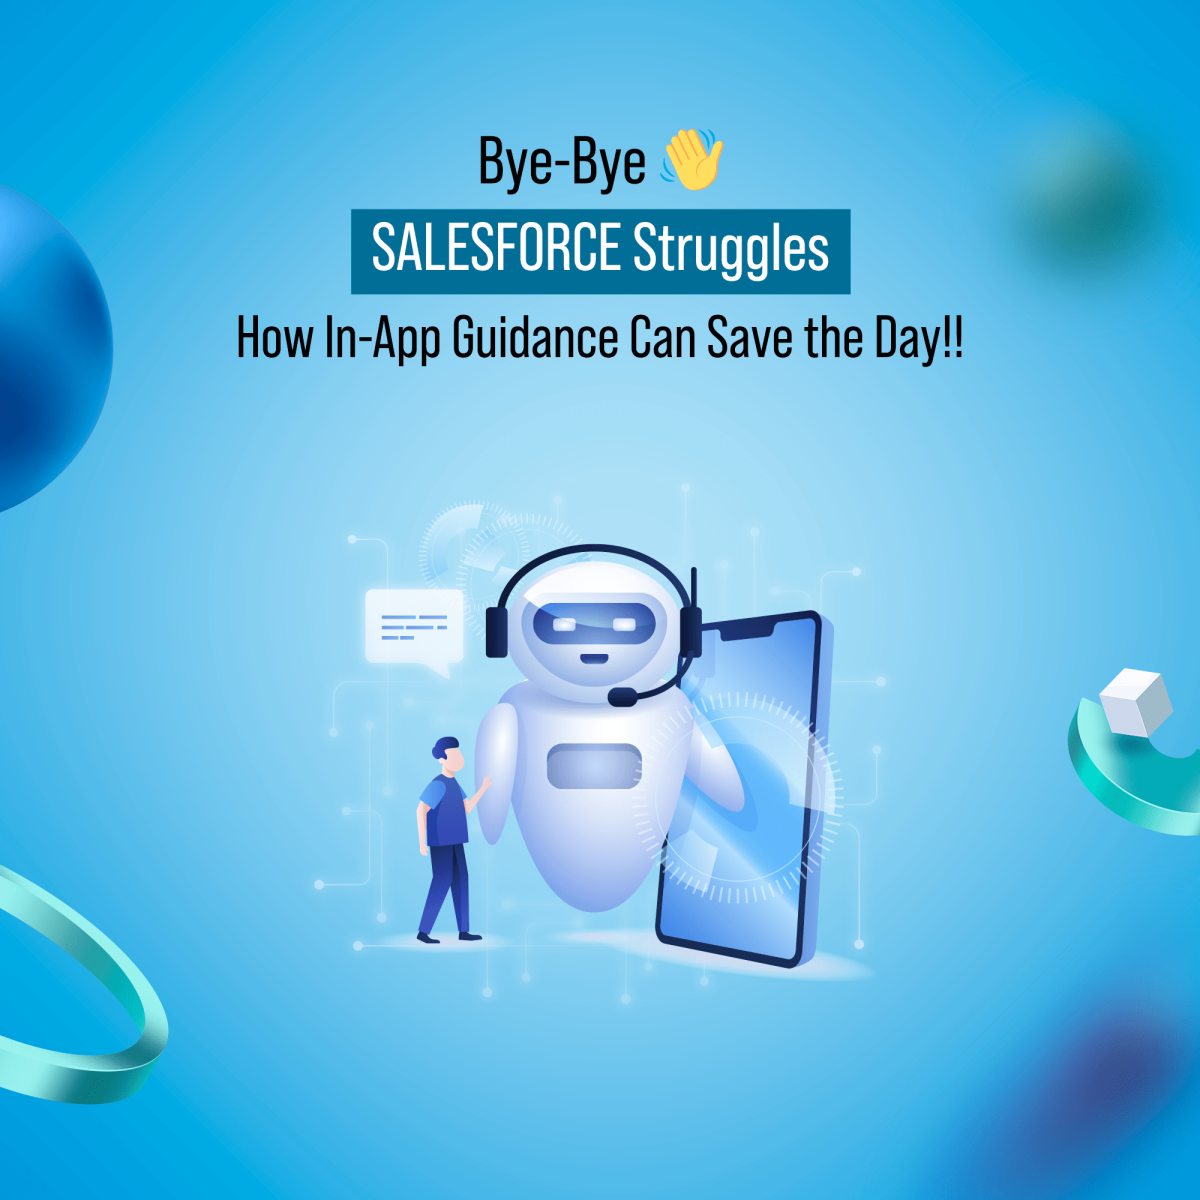 How In-App Guidance Can Save the Day